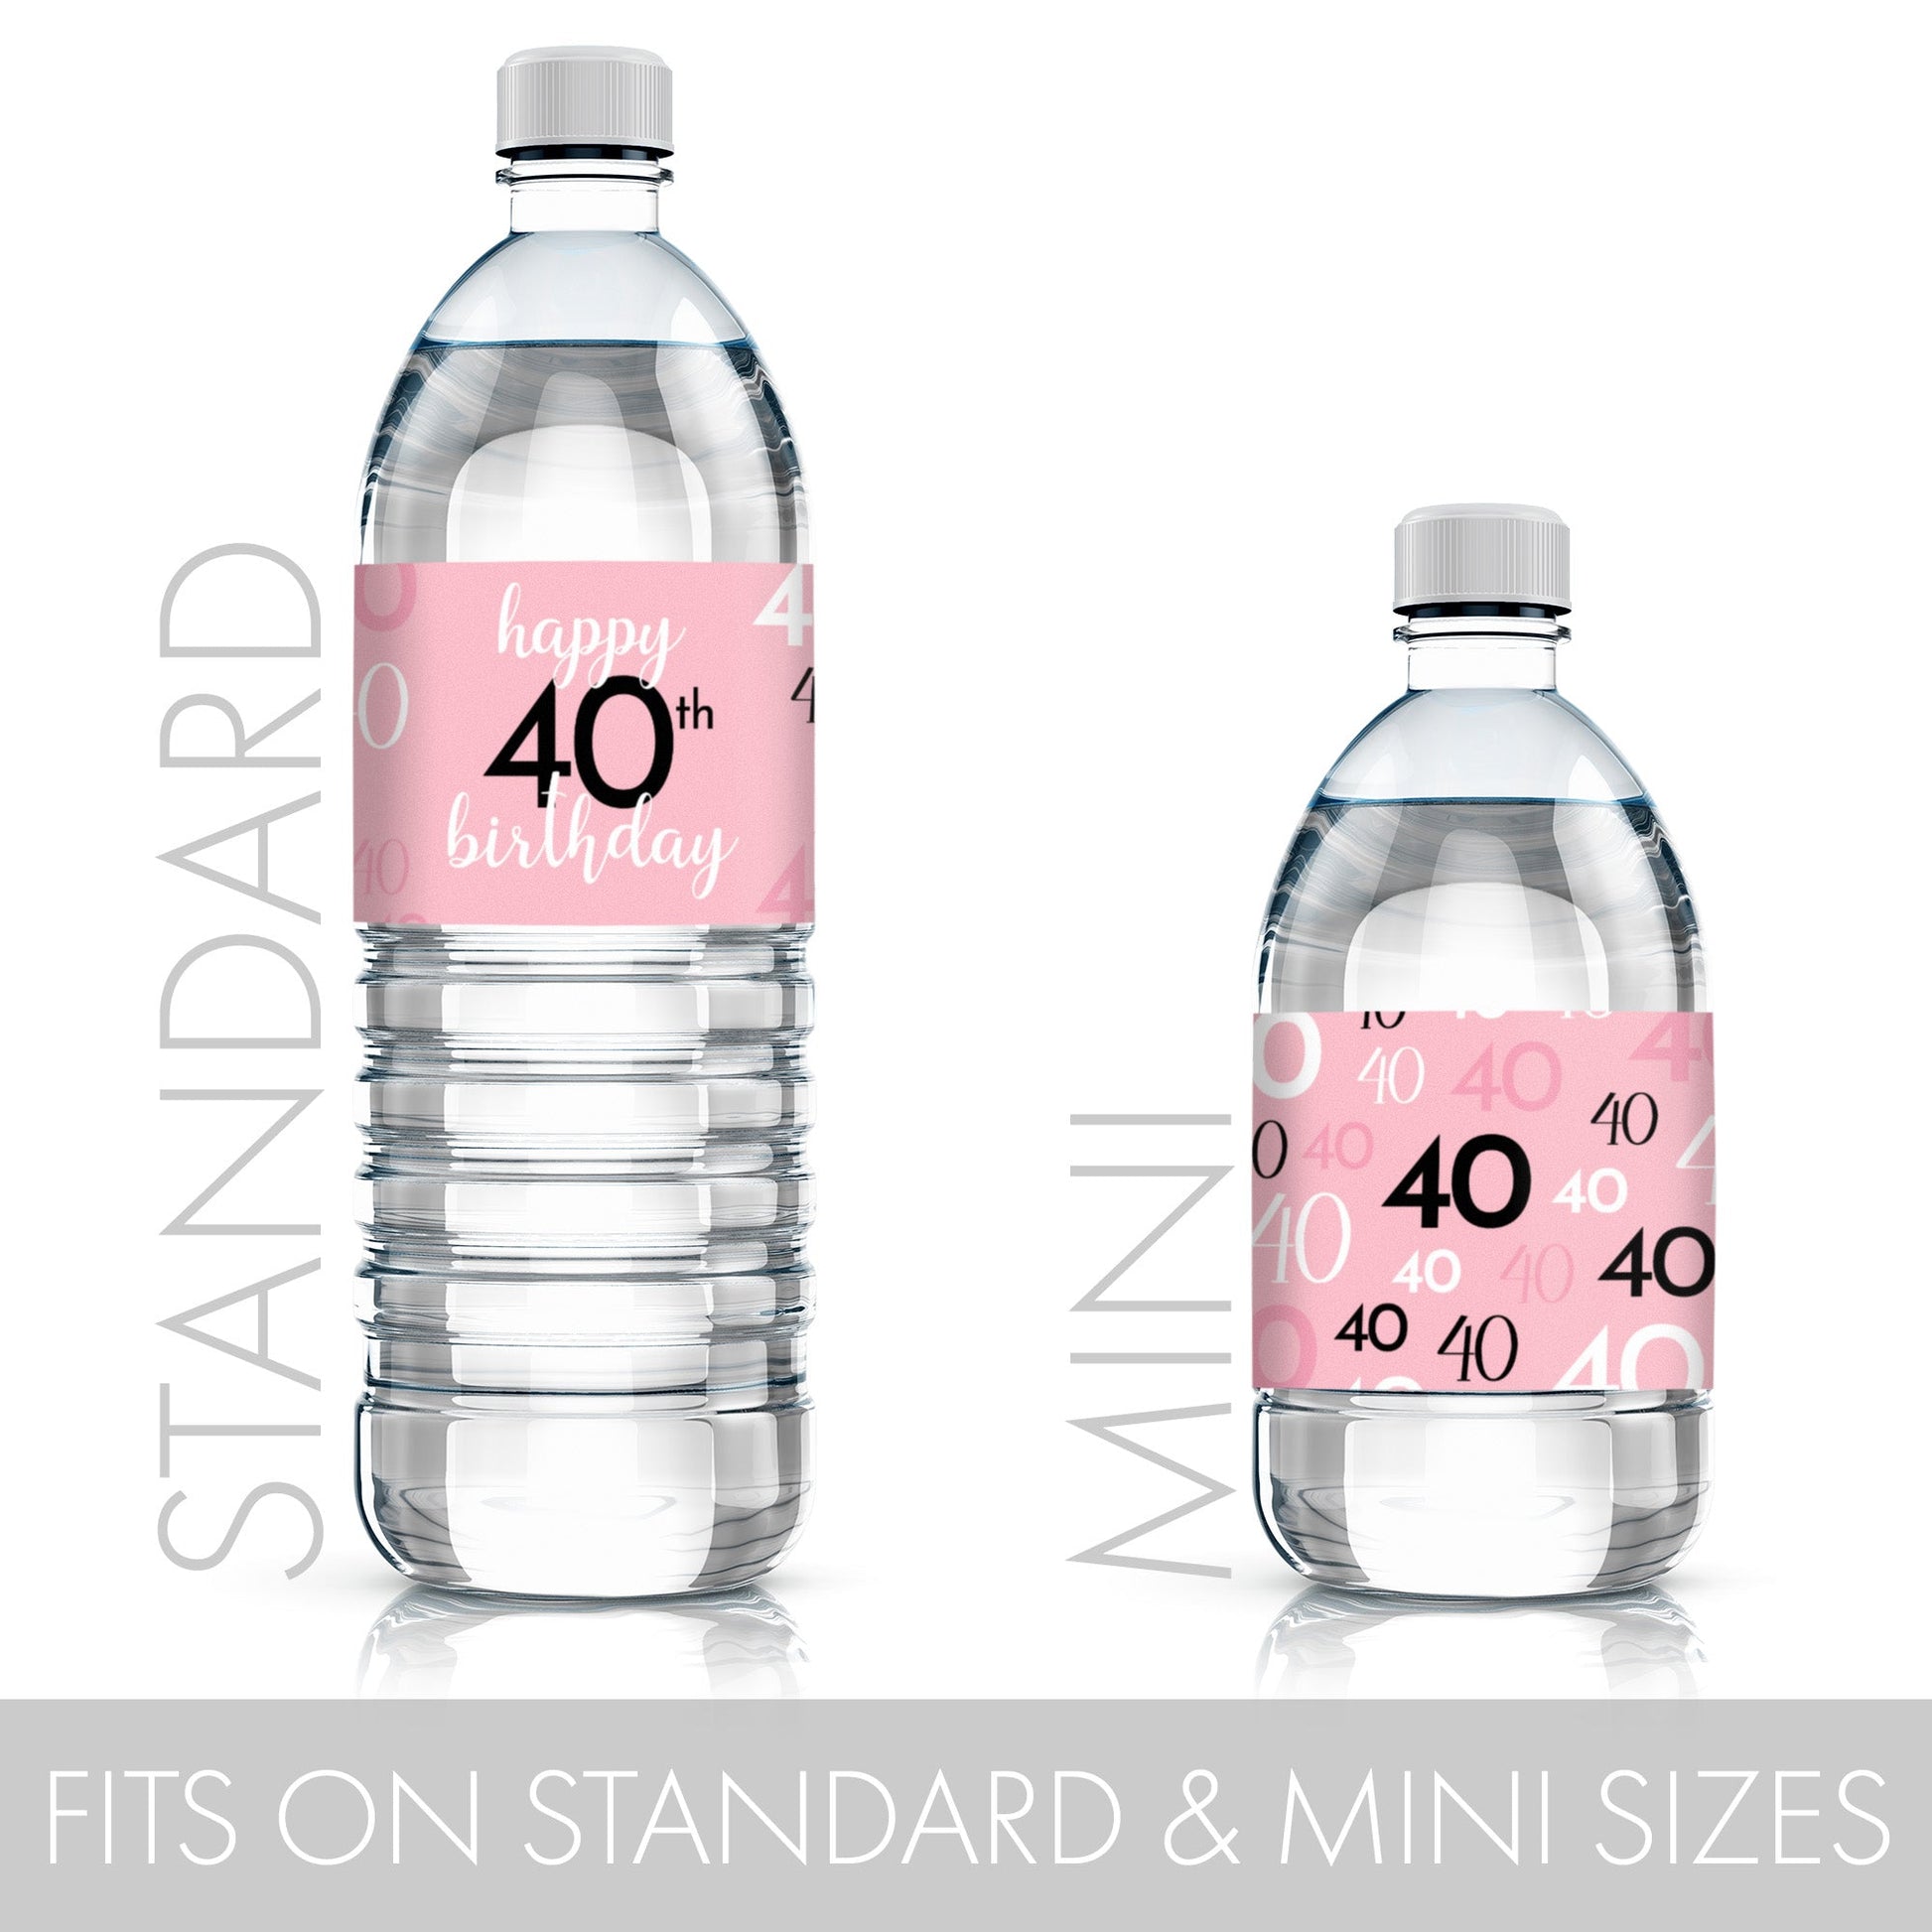 Celebrate in style with pink and black water bottle labels for your 40th birthday